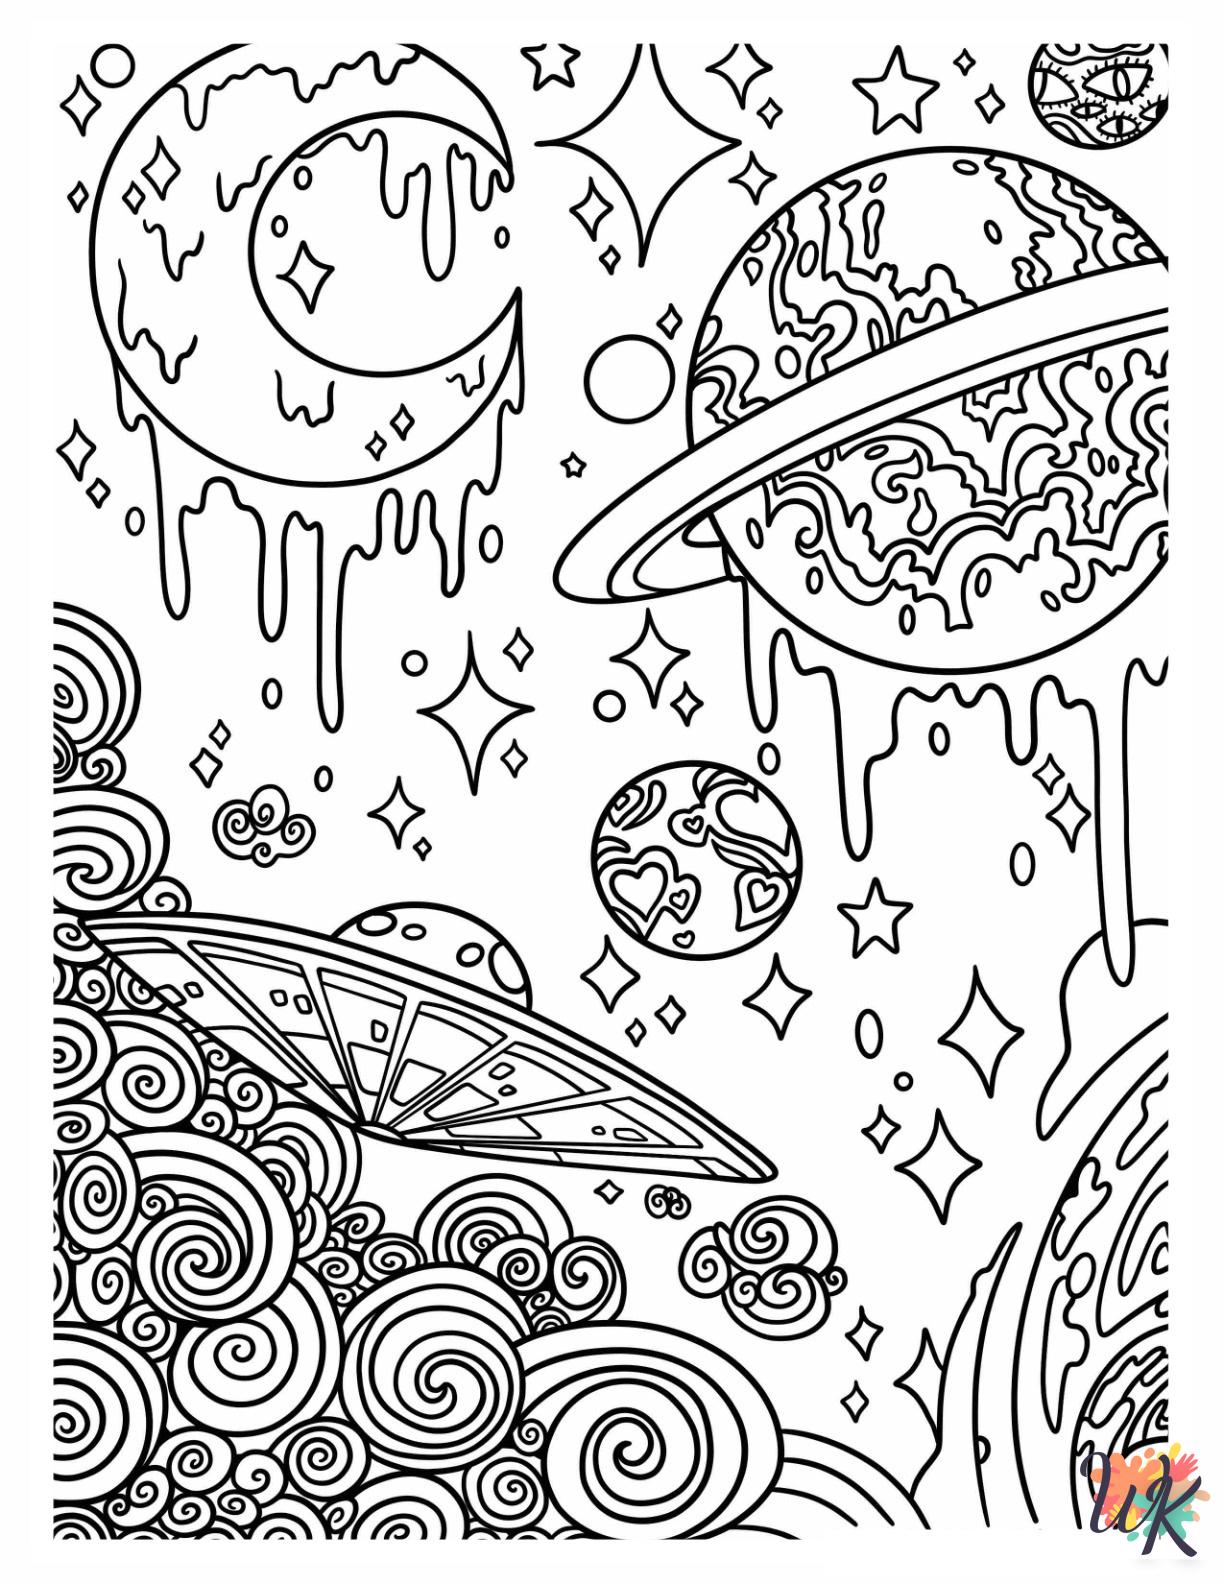 Aesthetic coloring pages easy